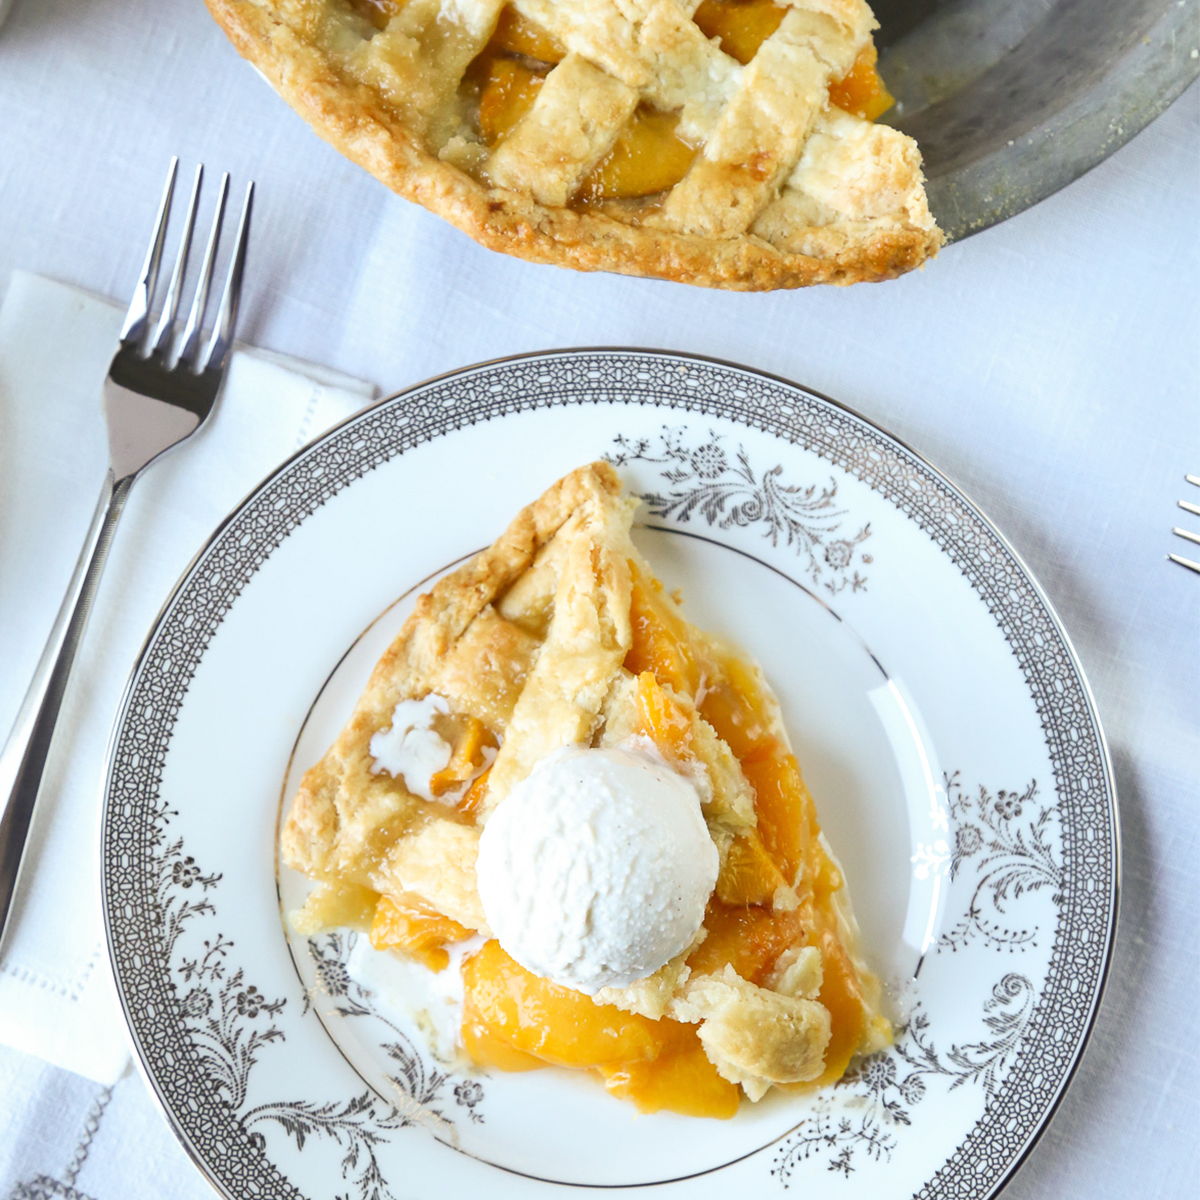 slice of peach pie on a piece of fine china with a fork on the side